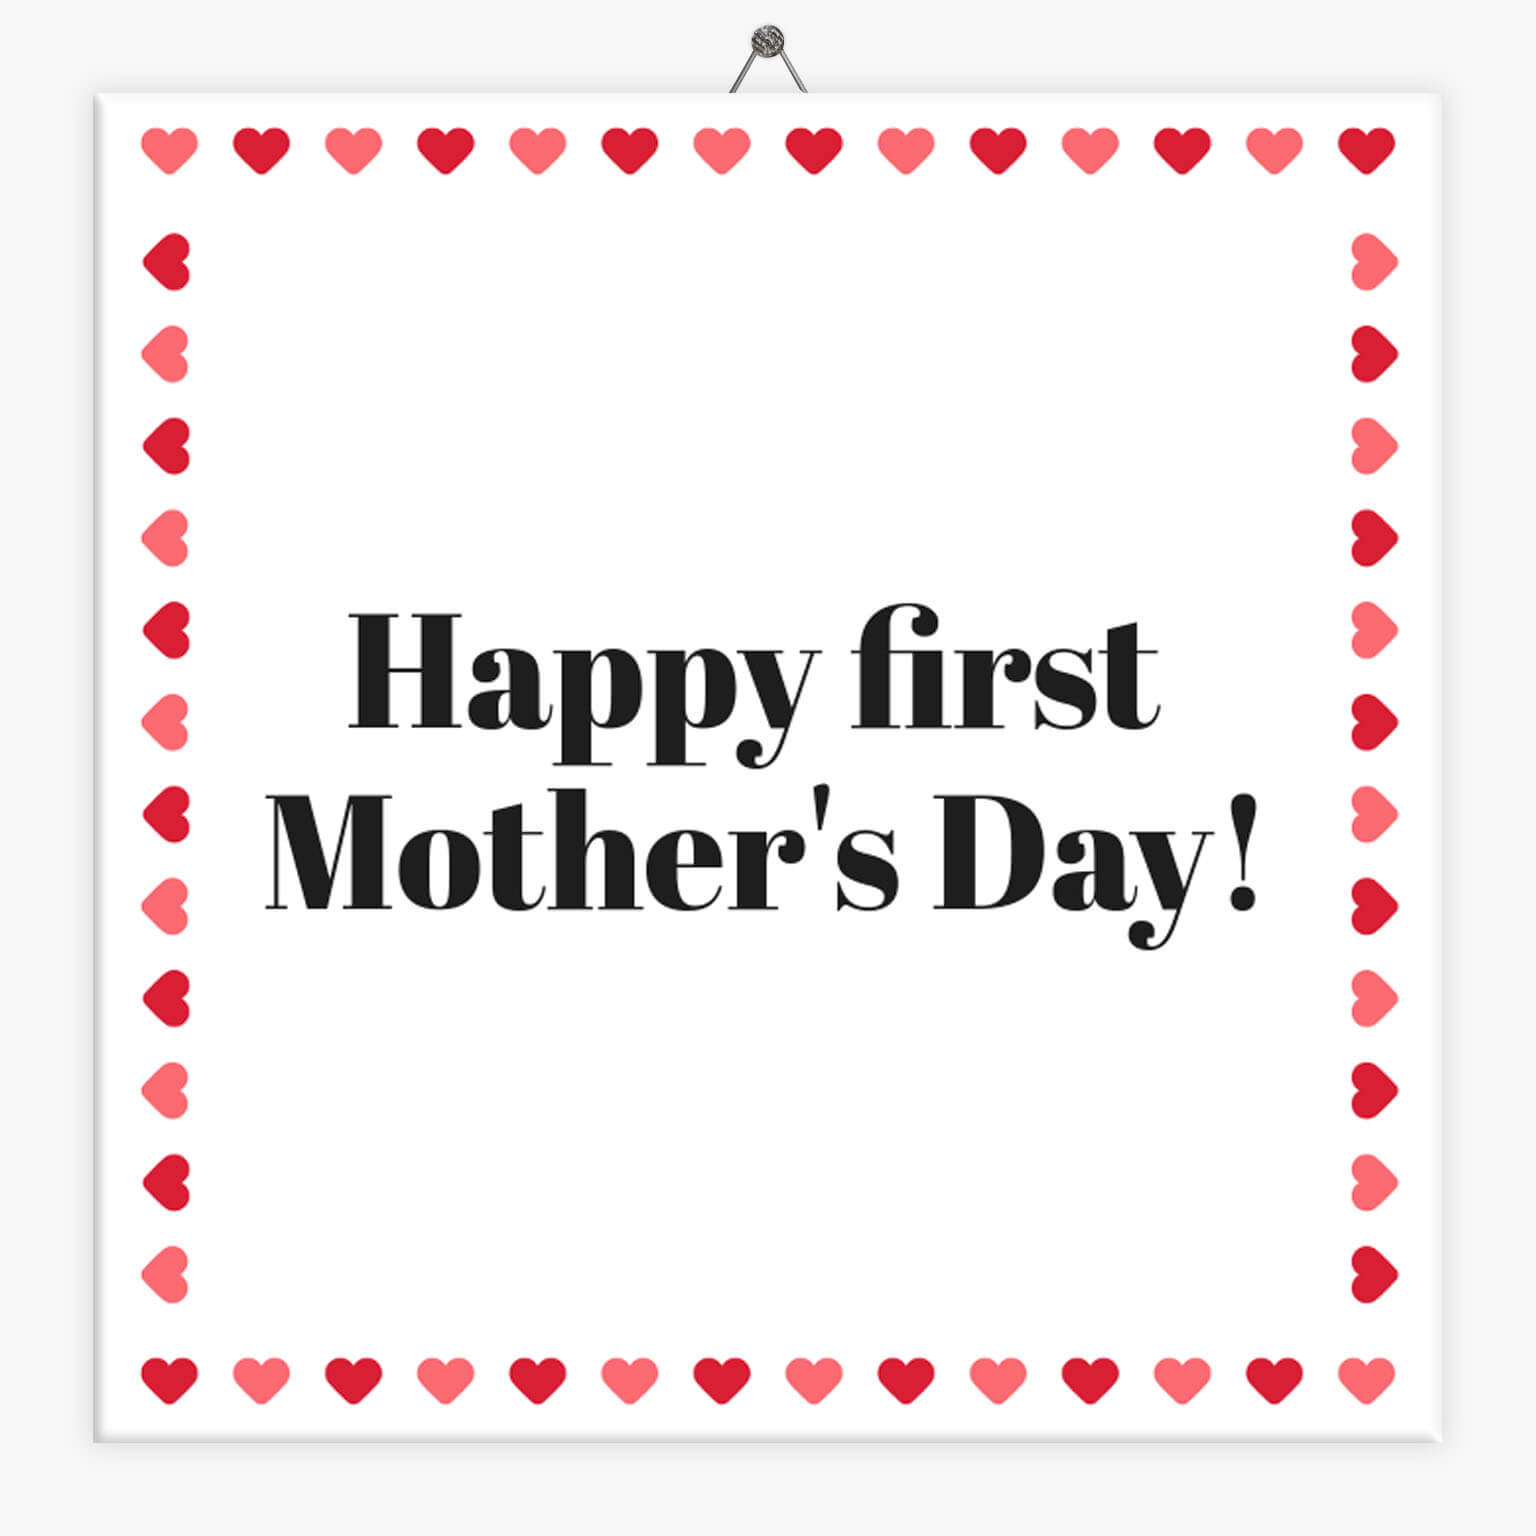 Tegeltje Moederdag: Happy first Mother's Day! + Plakhanger - moederdag cadeautje - moederdag cadeau - moederdag cadeau voor mama - eerste moederdag cadeau